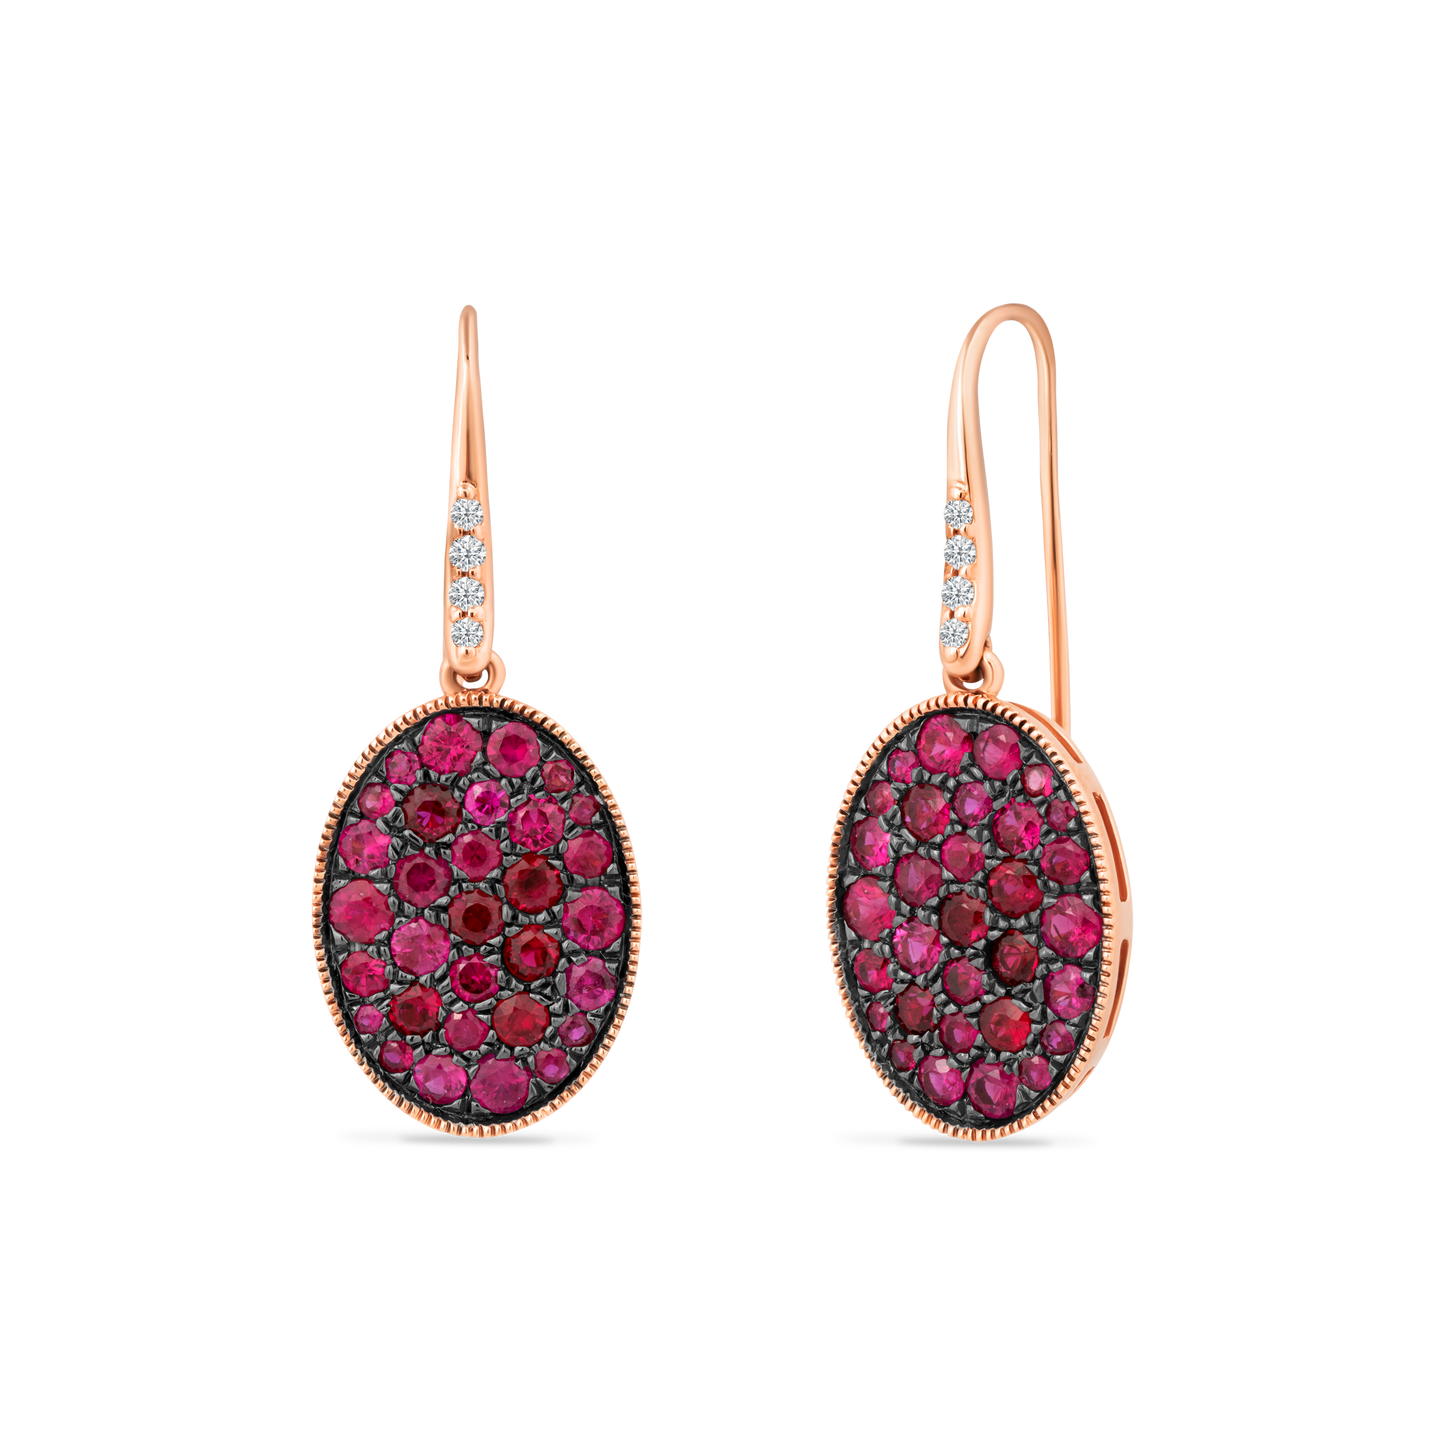 14K OVAL EARRINGS WITH 8 DIAMONDS 0.06CT AND 16 PINK SAPPHIRES 0.17CT